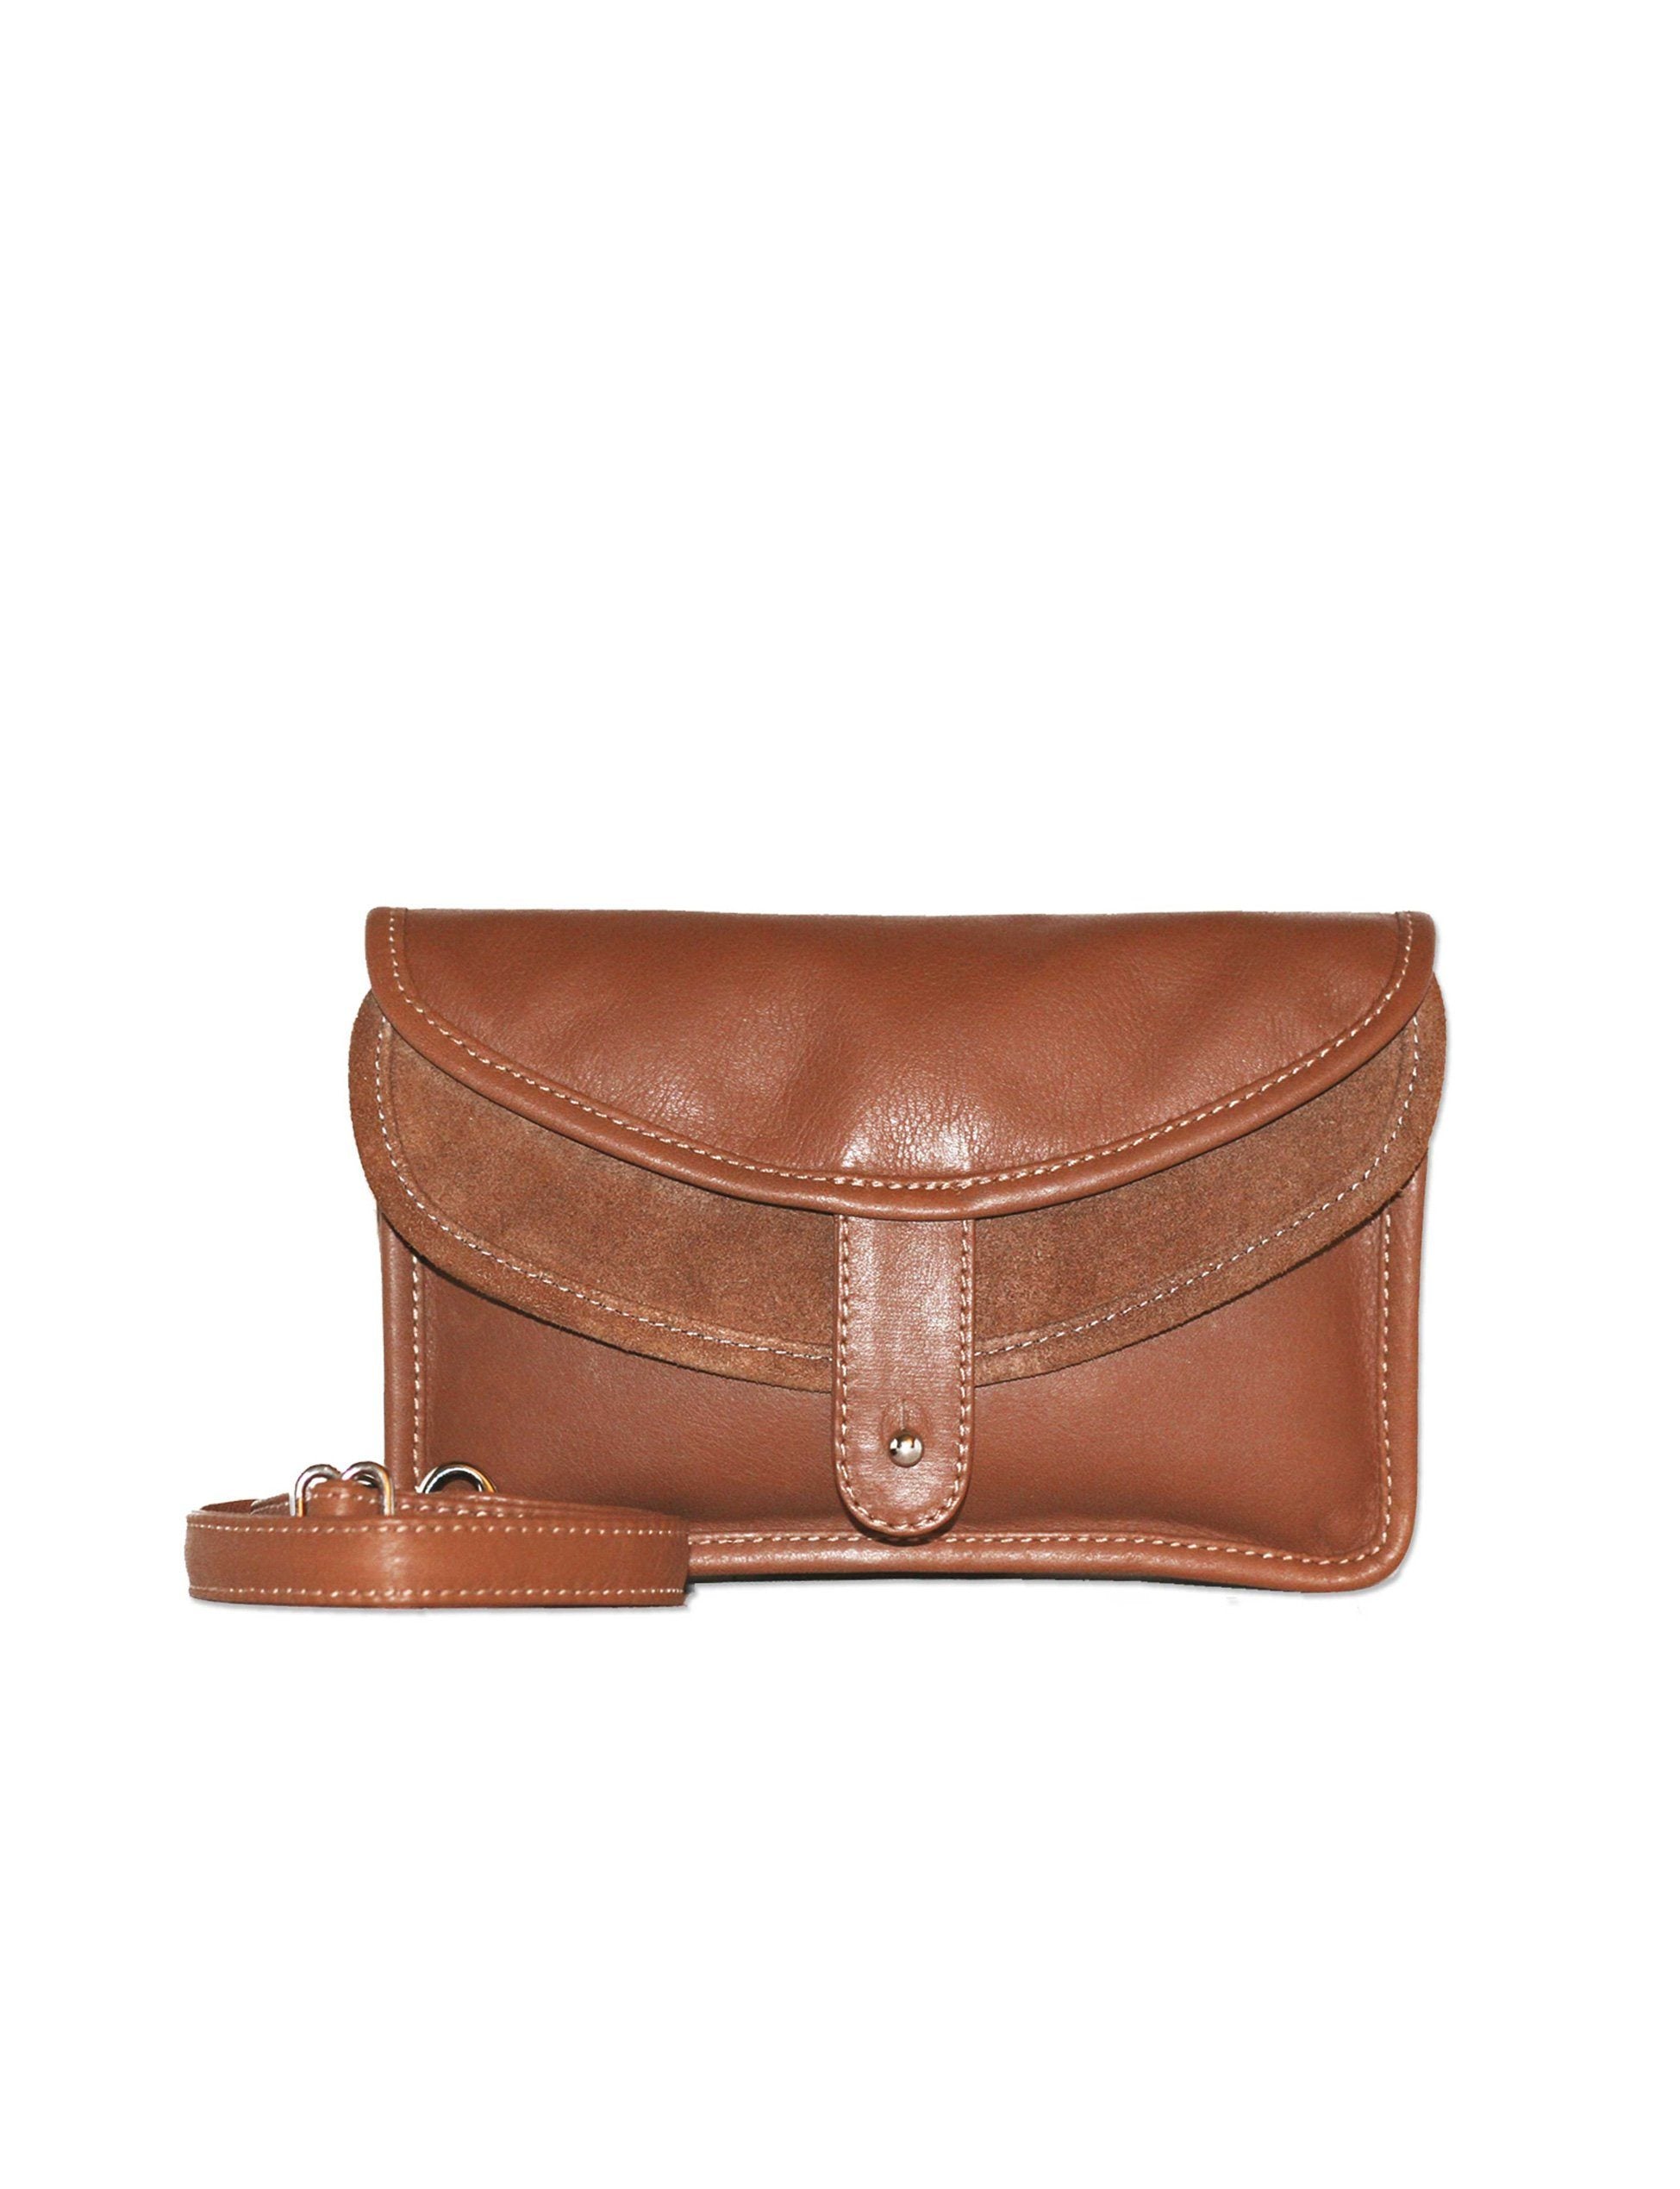 convertible fanny pack in cognac leather